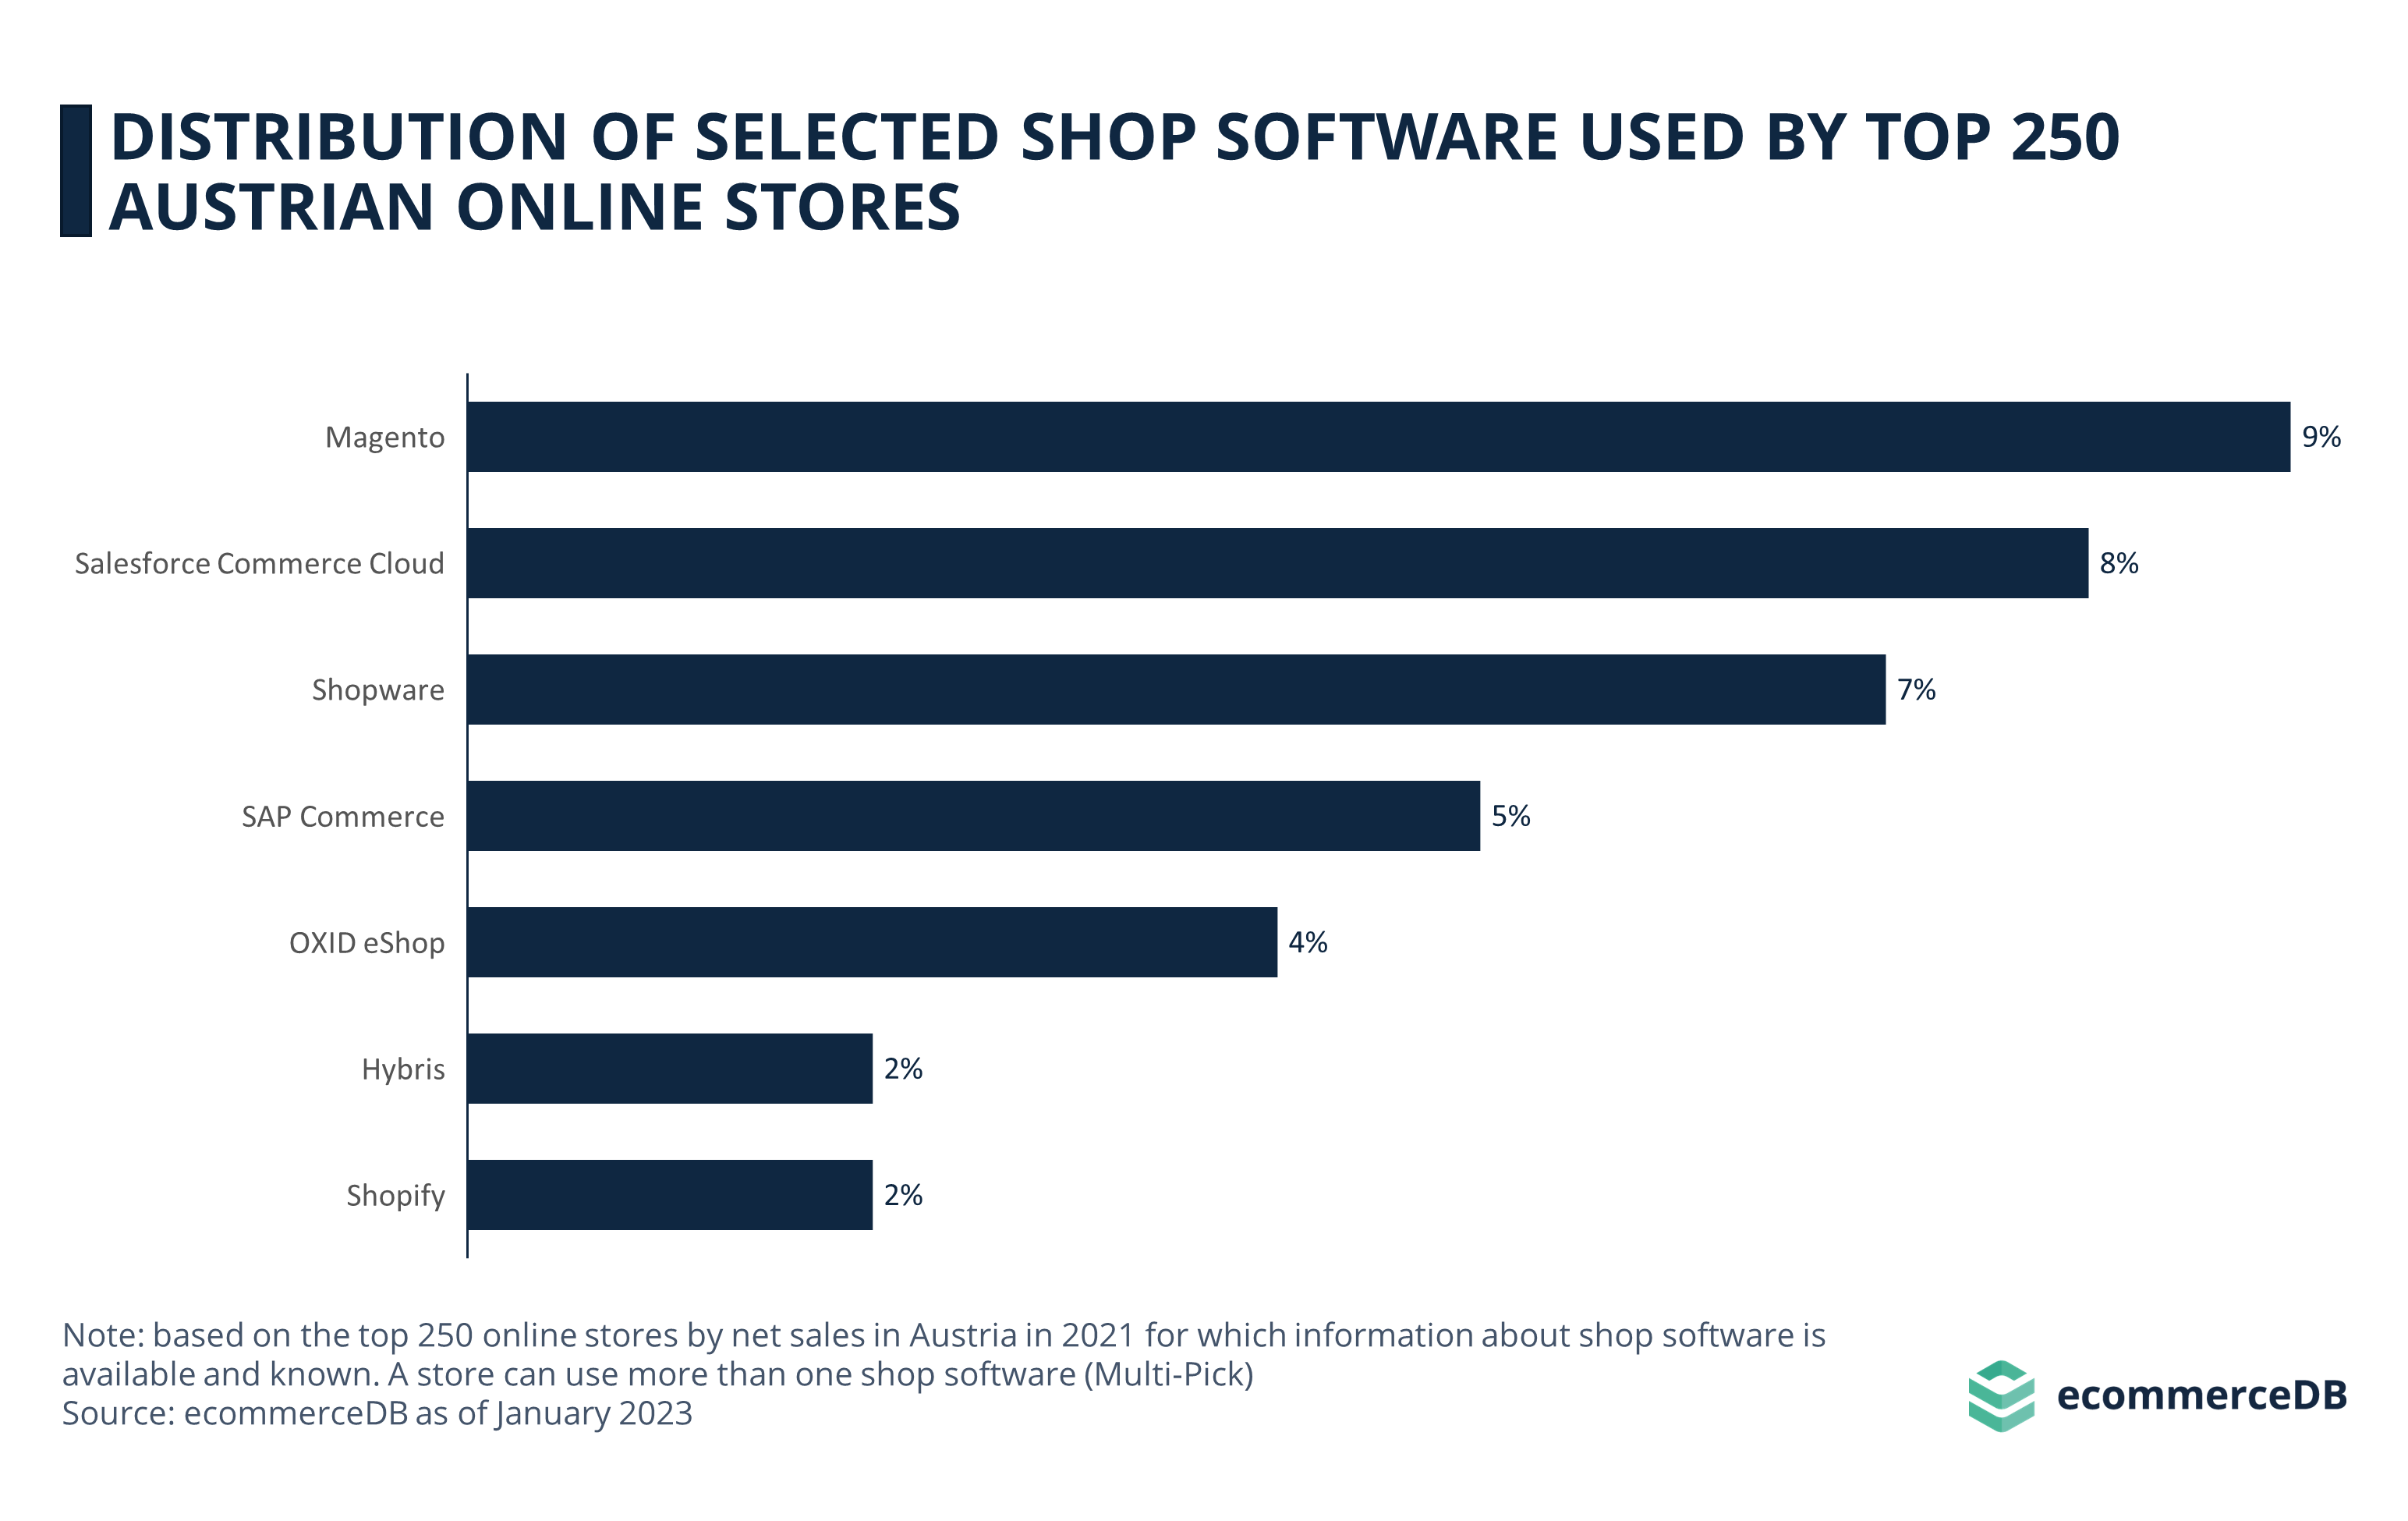 Distribution of Selected Shop Software Used by Top 250 Austrian Online Stores